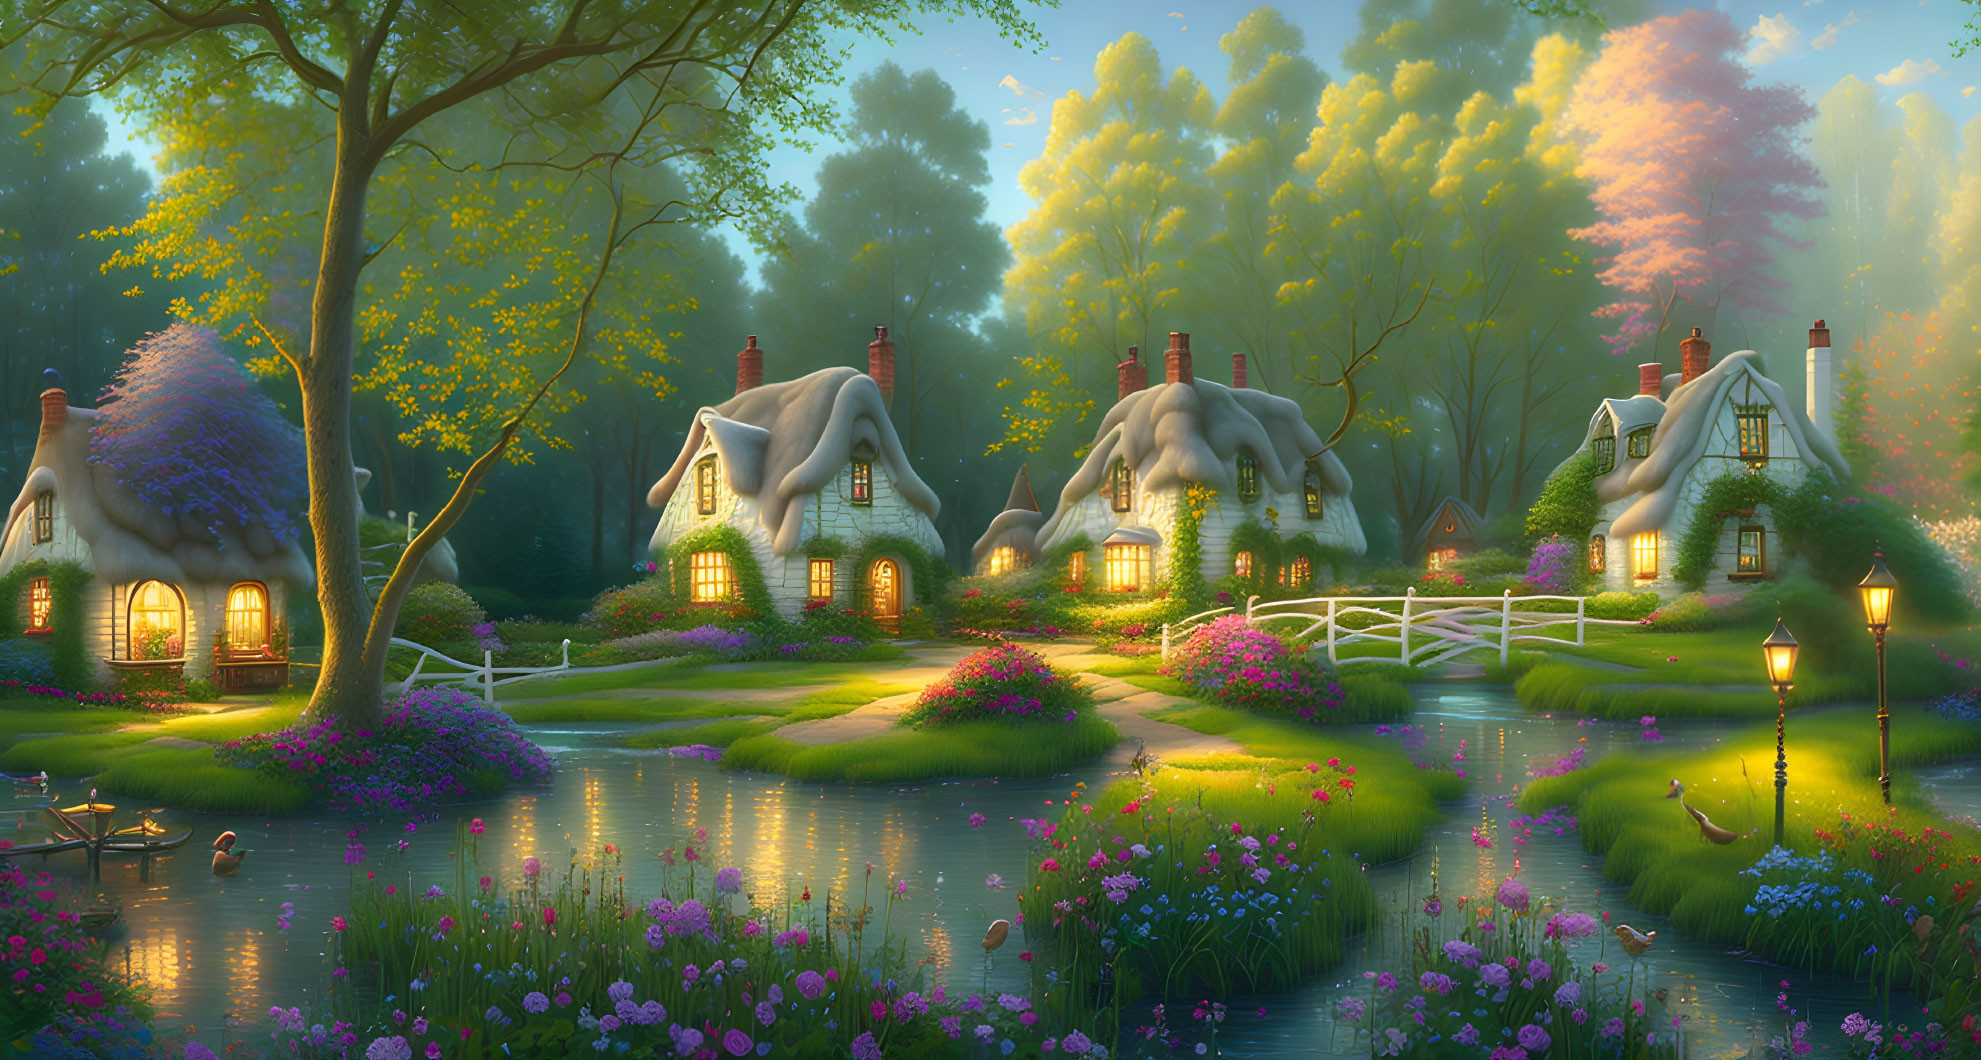 Tranquil twilight landscape with thatched-roof cottages, pond, greenery, flowers,